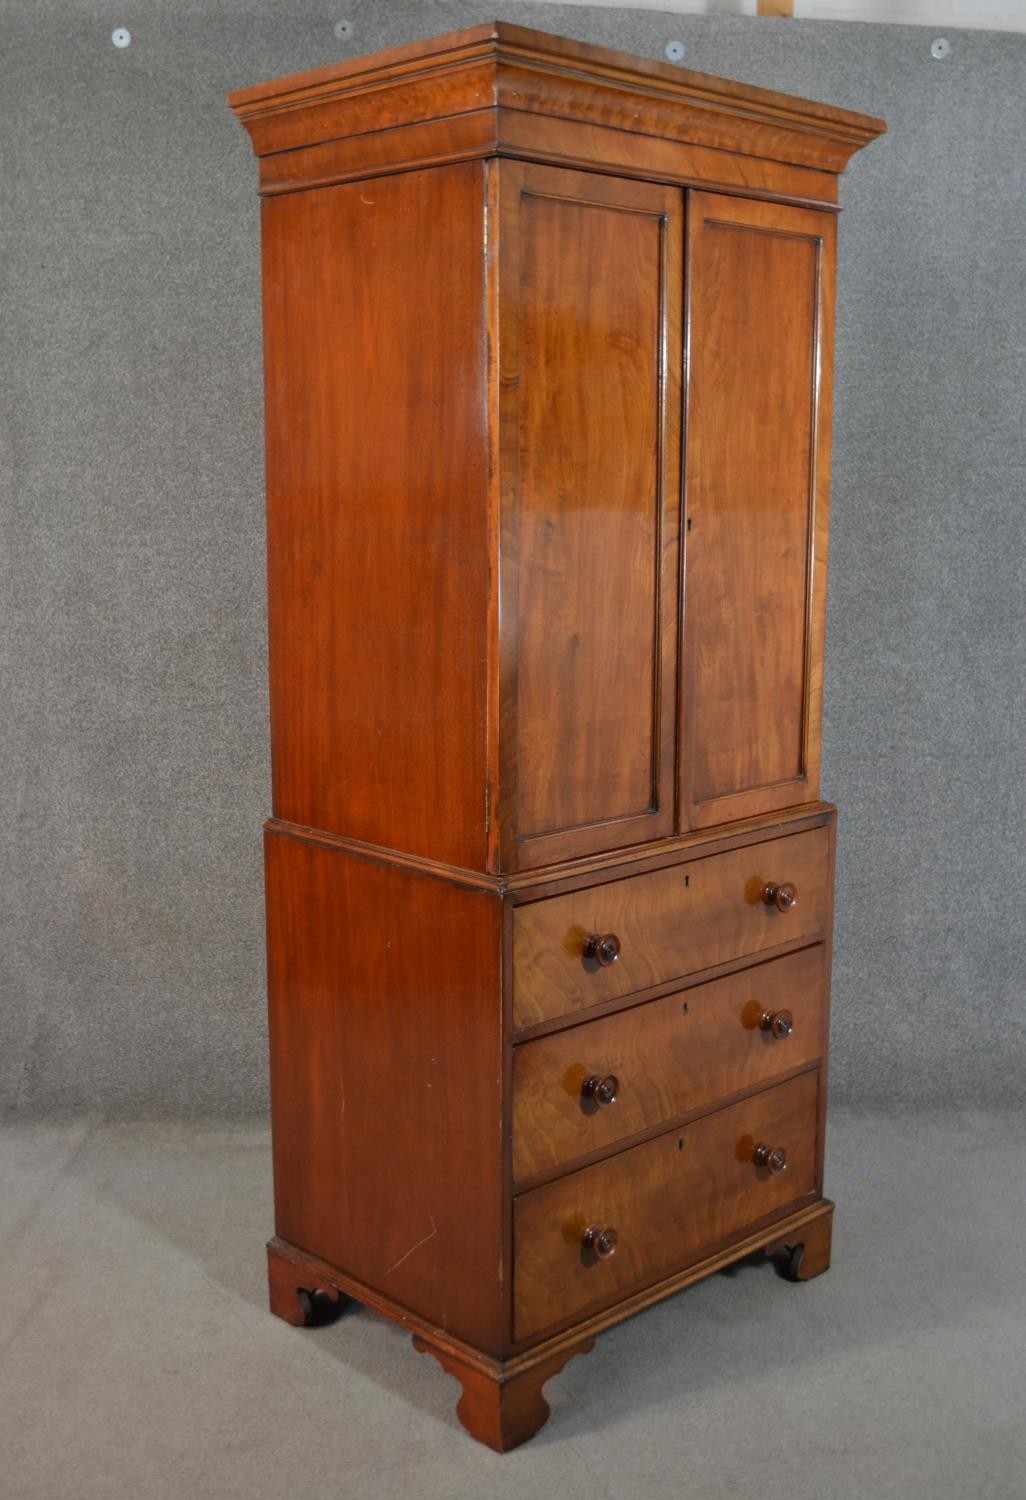 An early 19th century mahogany linen press, of narrow proportions, with two cupboard doors, - Image 7 of 7